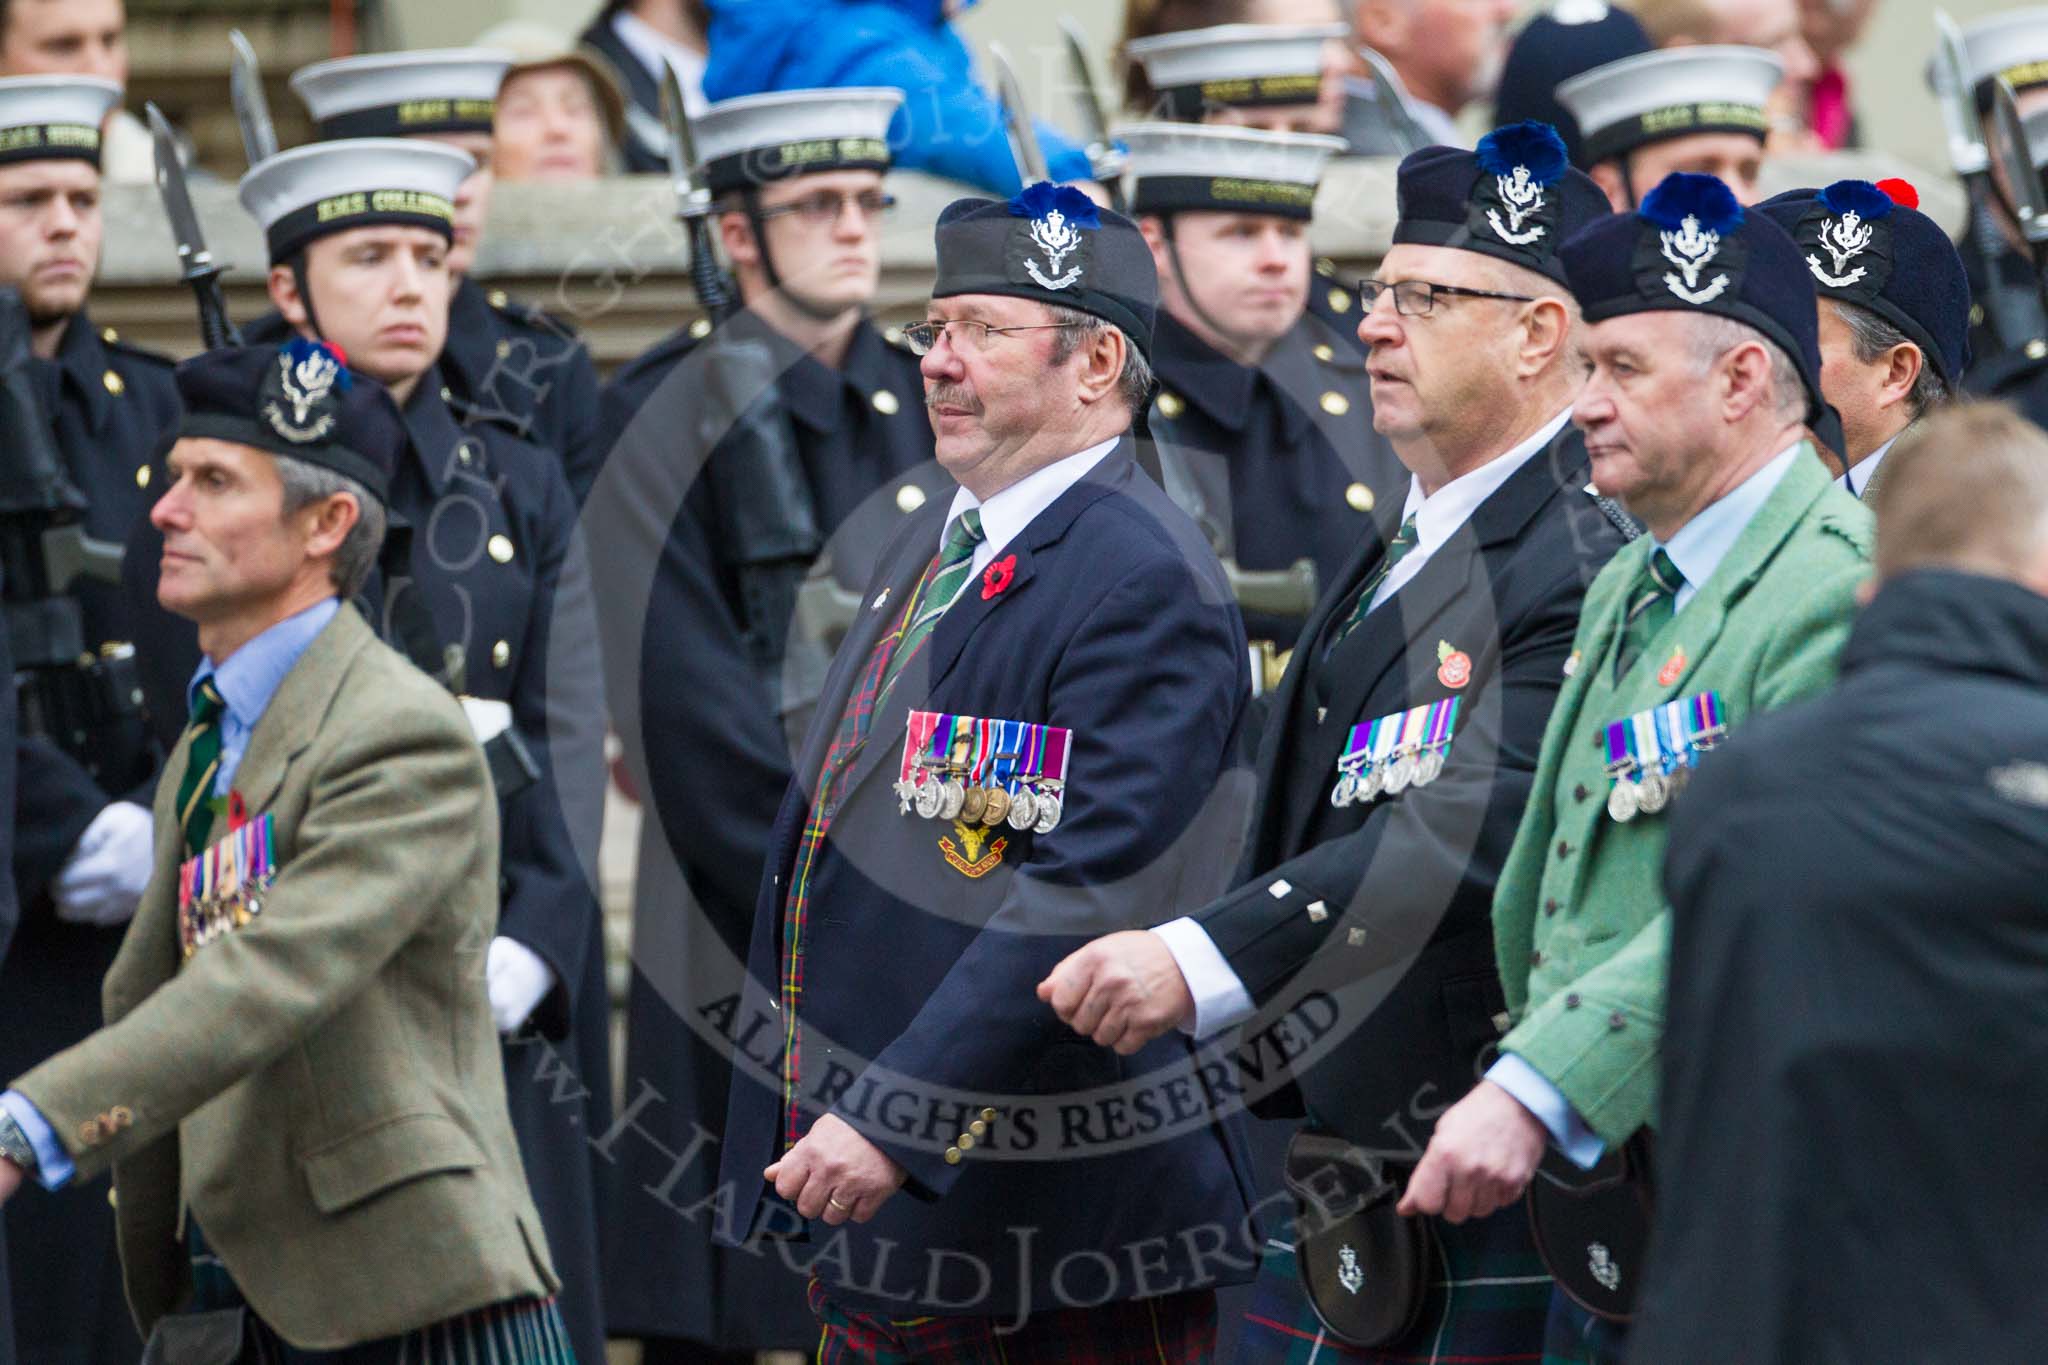 Remembrance Sunday at the Cenotaph 2015: Group A8, Queen's Own Highlanders Regimental Association.
Cenotaph, Whitehall, London SW1,
London,
Greater London,
United Kingdom,
on 08 November 2015 at 12:10, image #1228